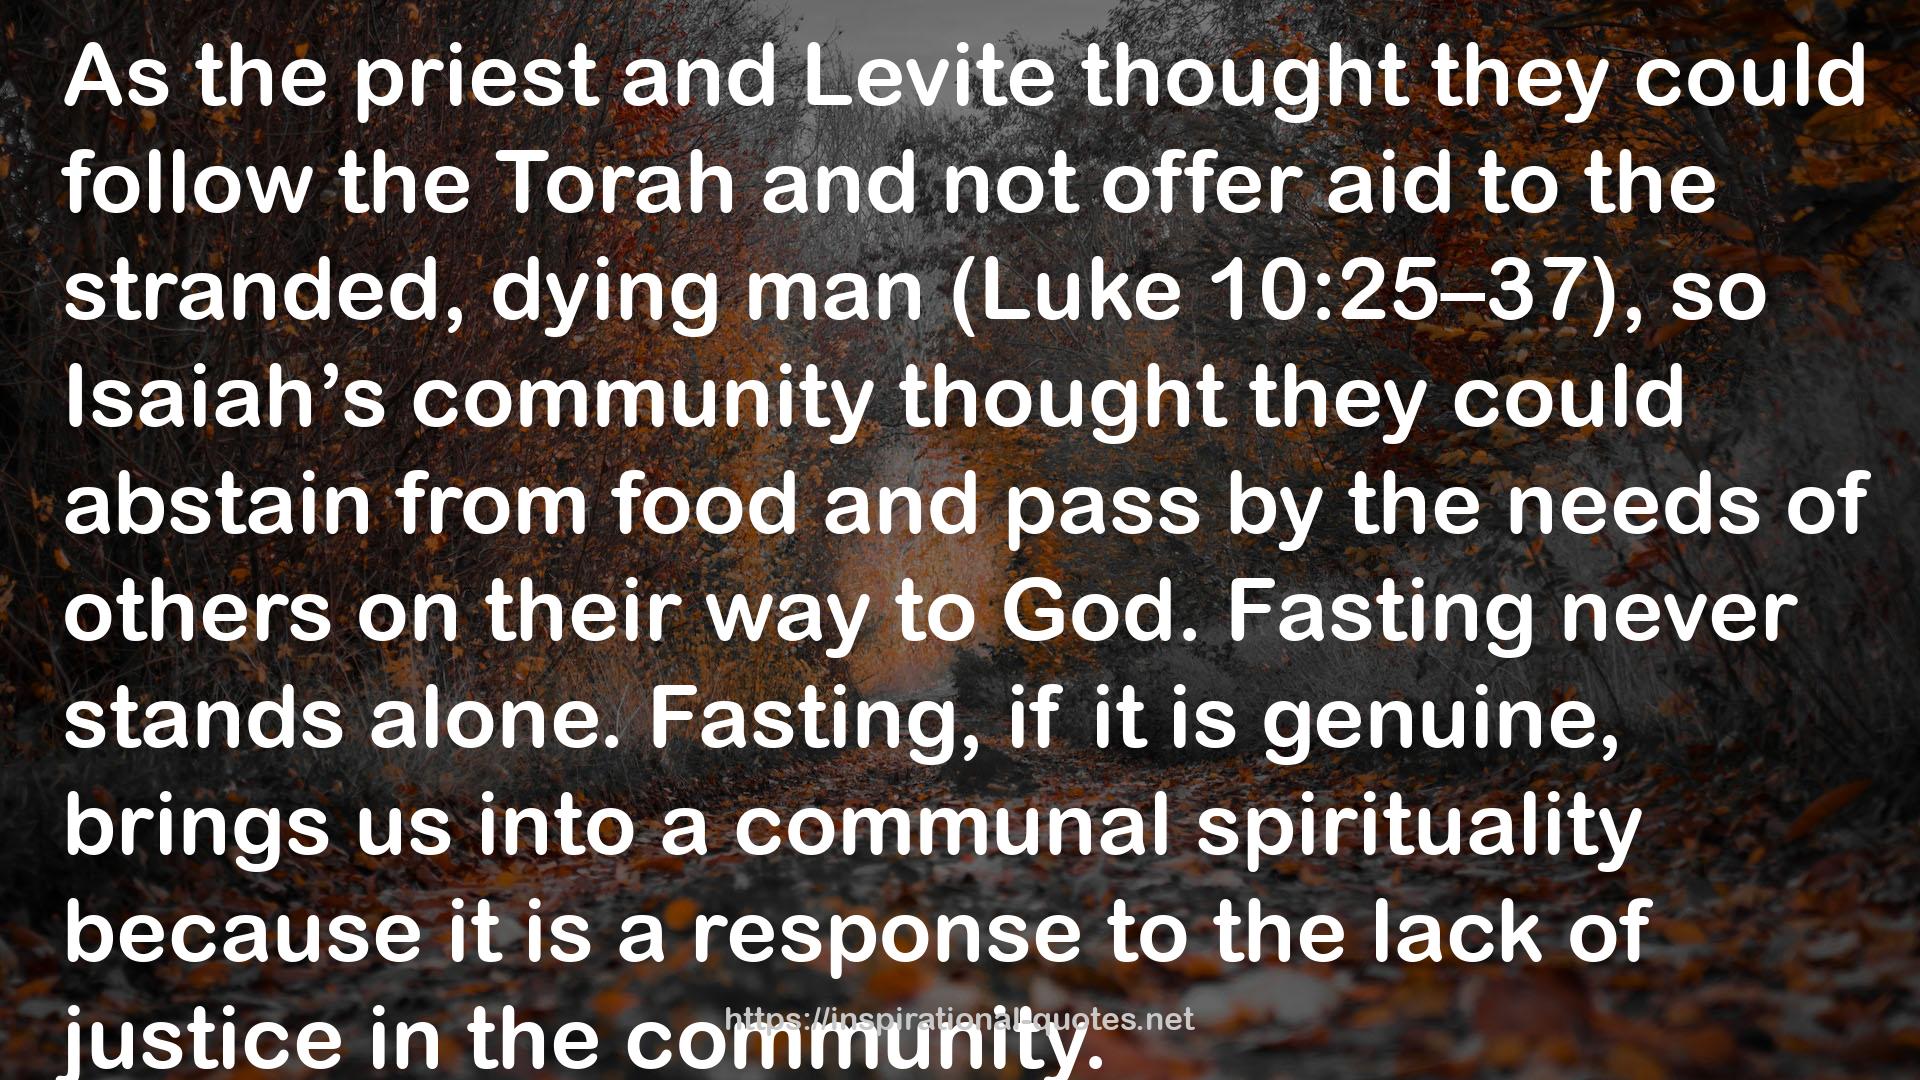 Fasting: Fasting as Body Talk in the Christian Tradition QUOTES